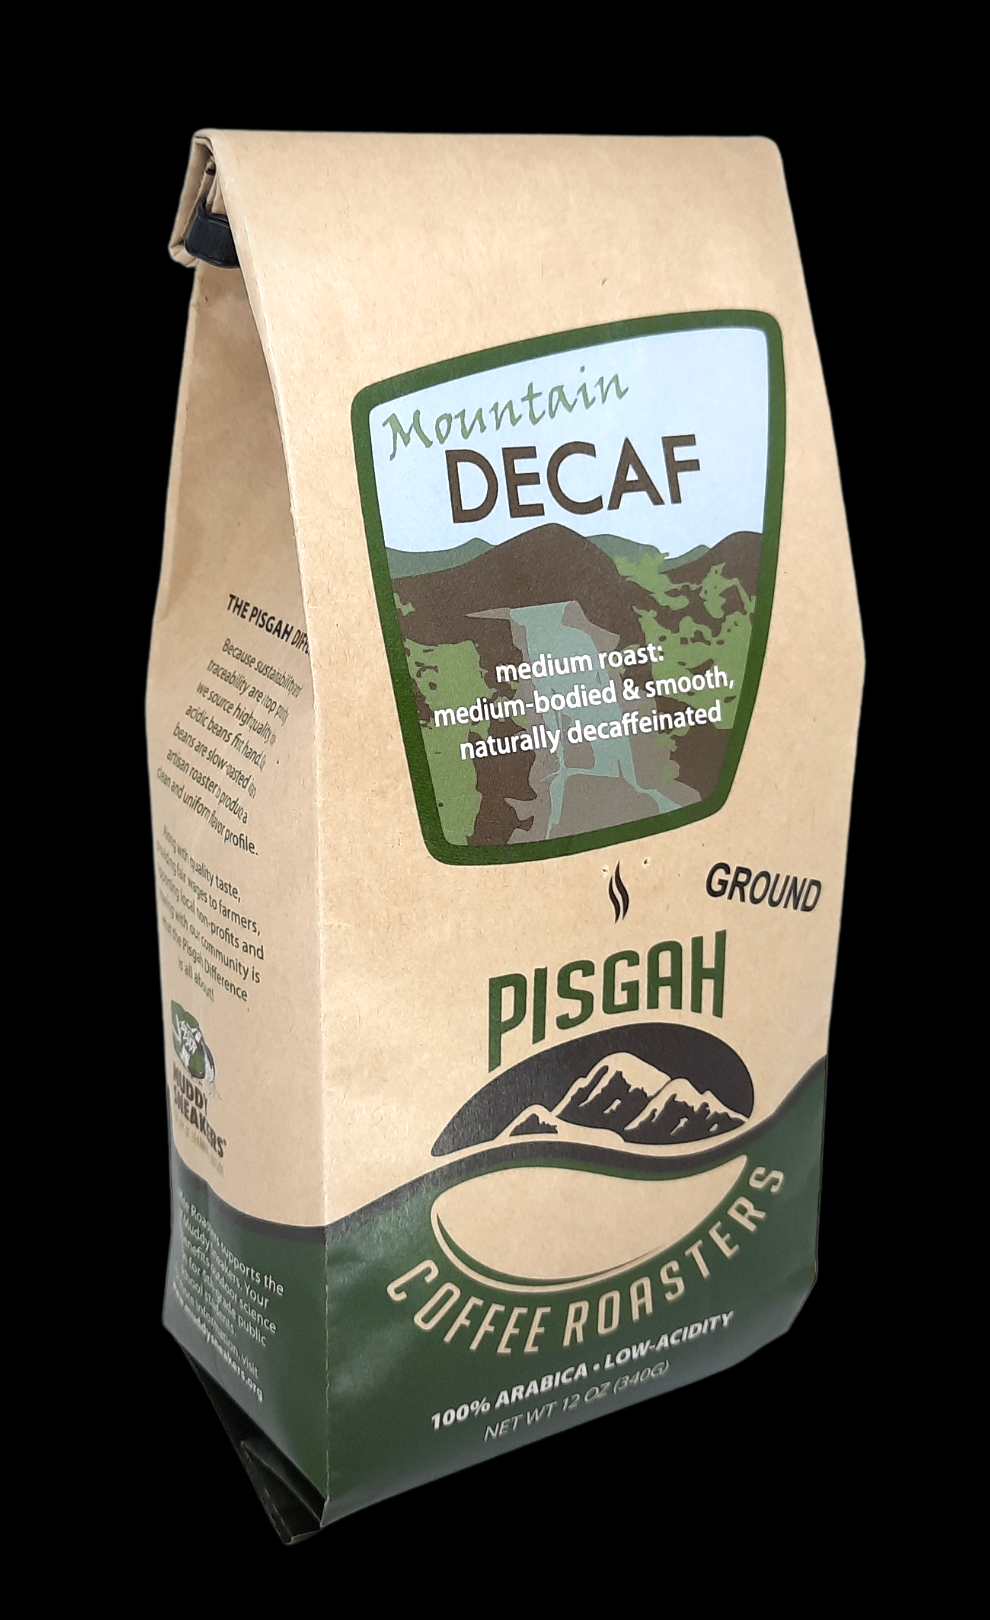 Decaf Mountain Water